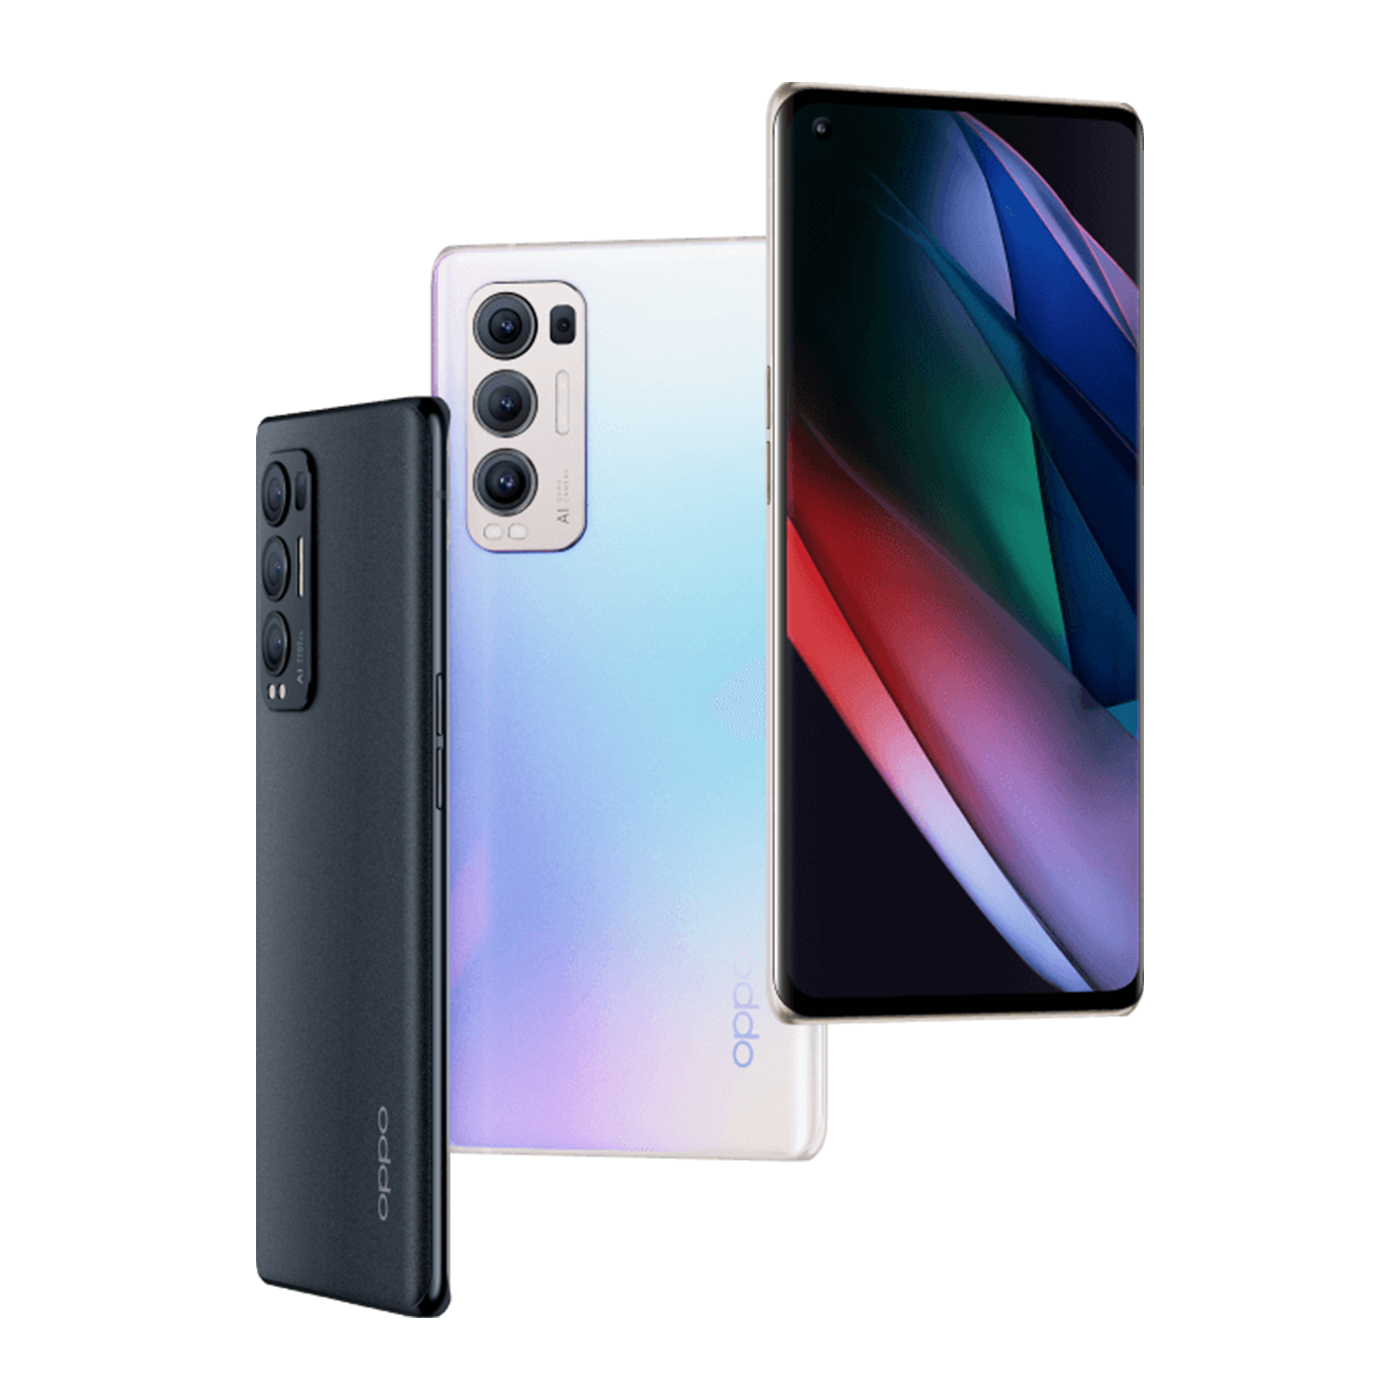 Oppo Find X3 Neo 5G 6.55" AMOLED Display HDR10+, Snapdragon 865, Quad Camera 50 MP, f/1.8